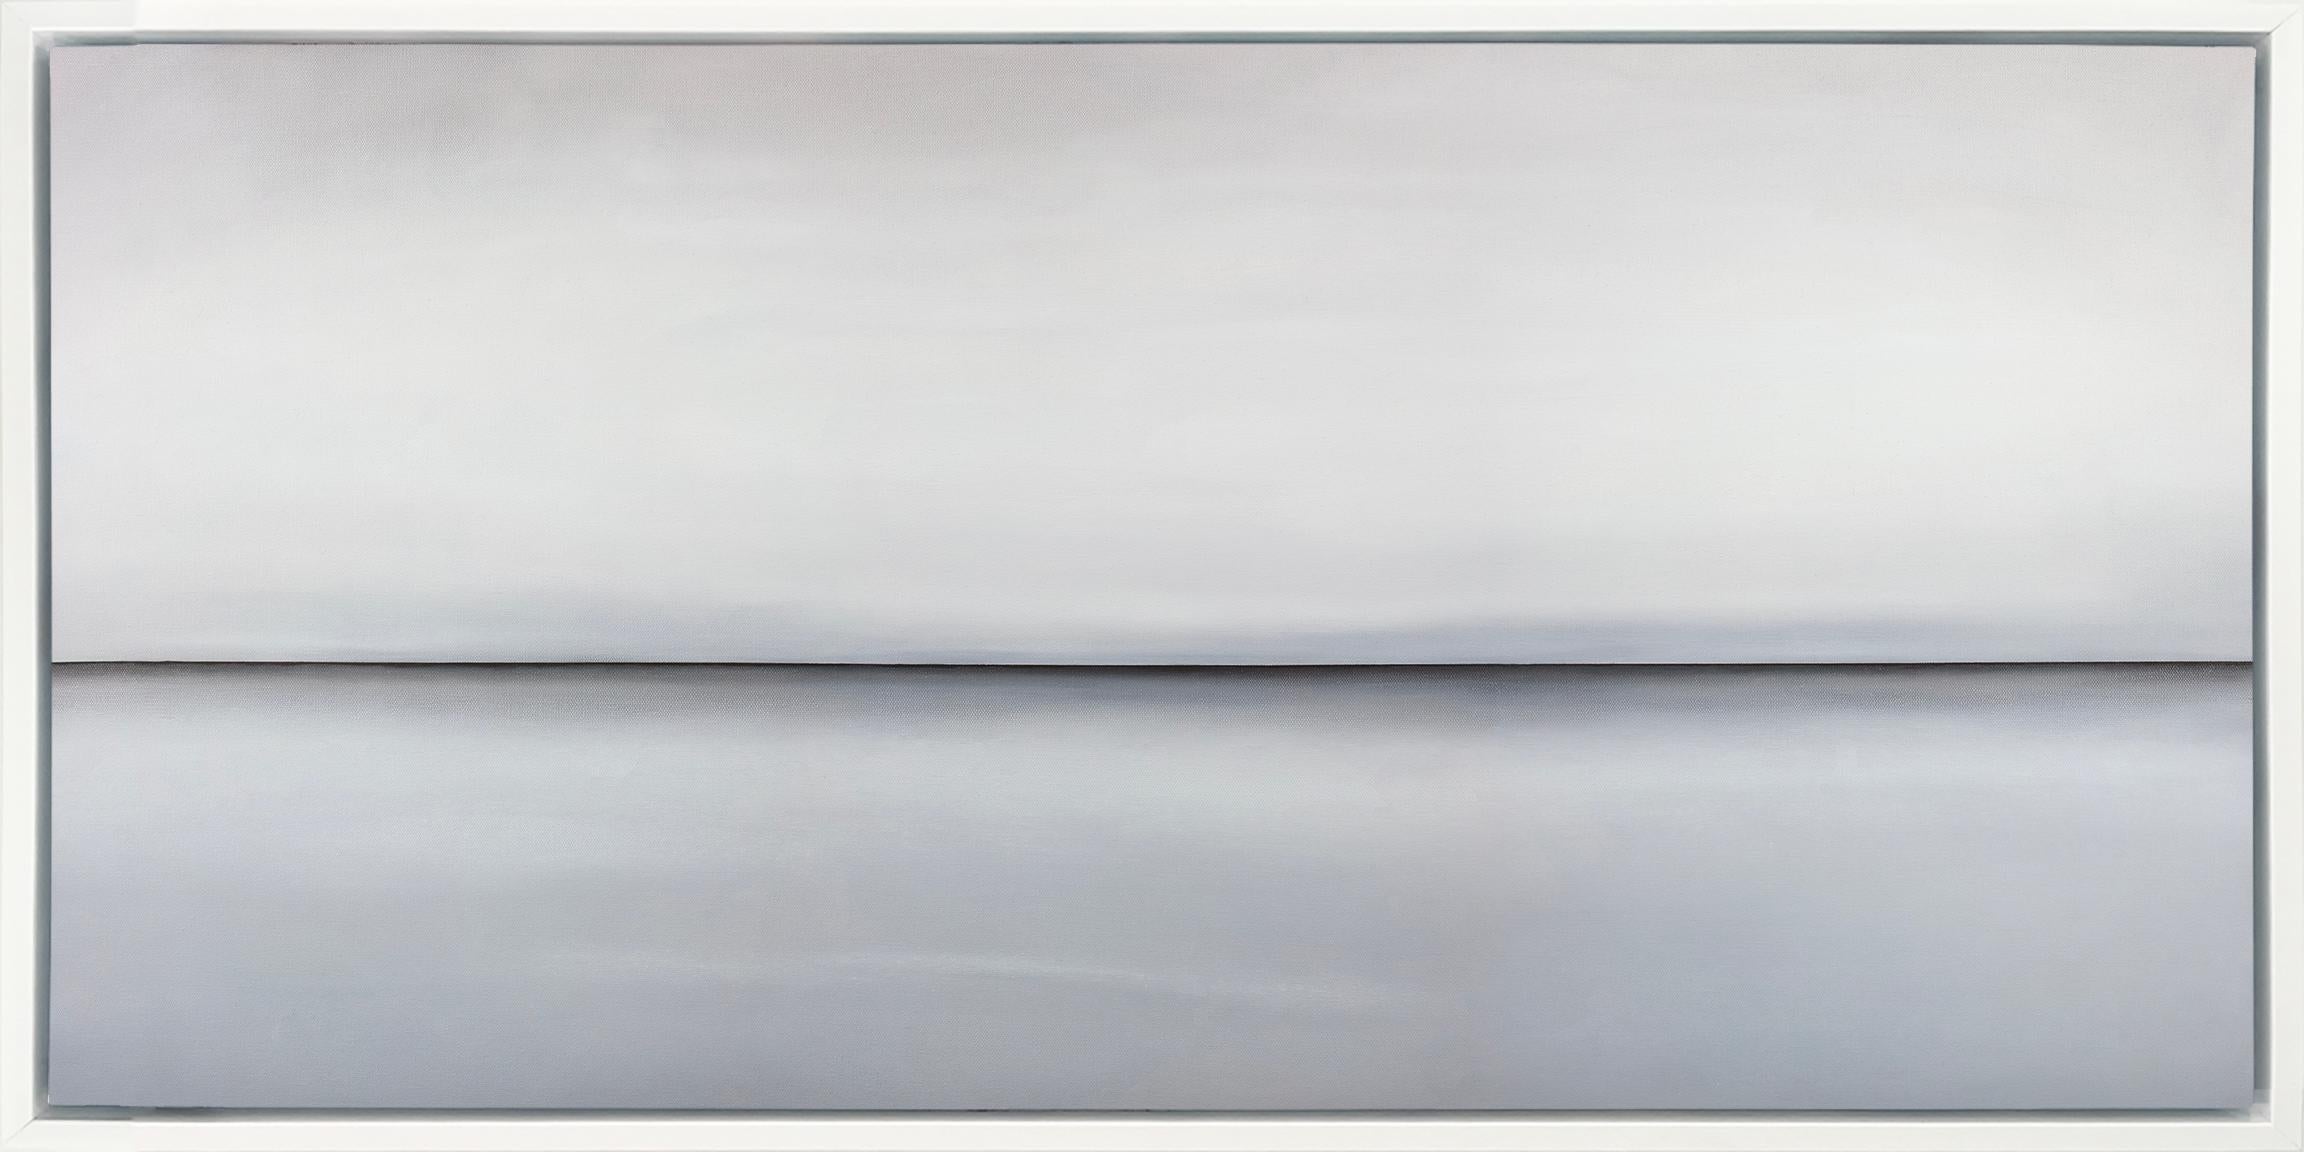 This abstract landscape limited edition print by Tony Iadicicco features a light grey palette. It has an abstracted landscape composition, with a stark horizon line running through the composition and soft, blended grey tones above and below it,